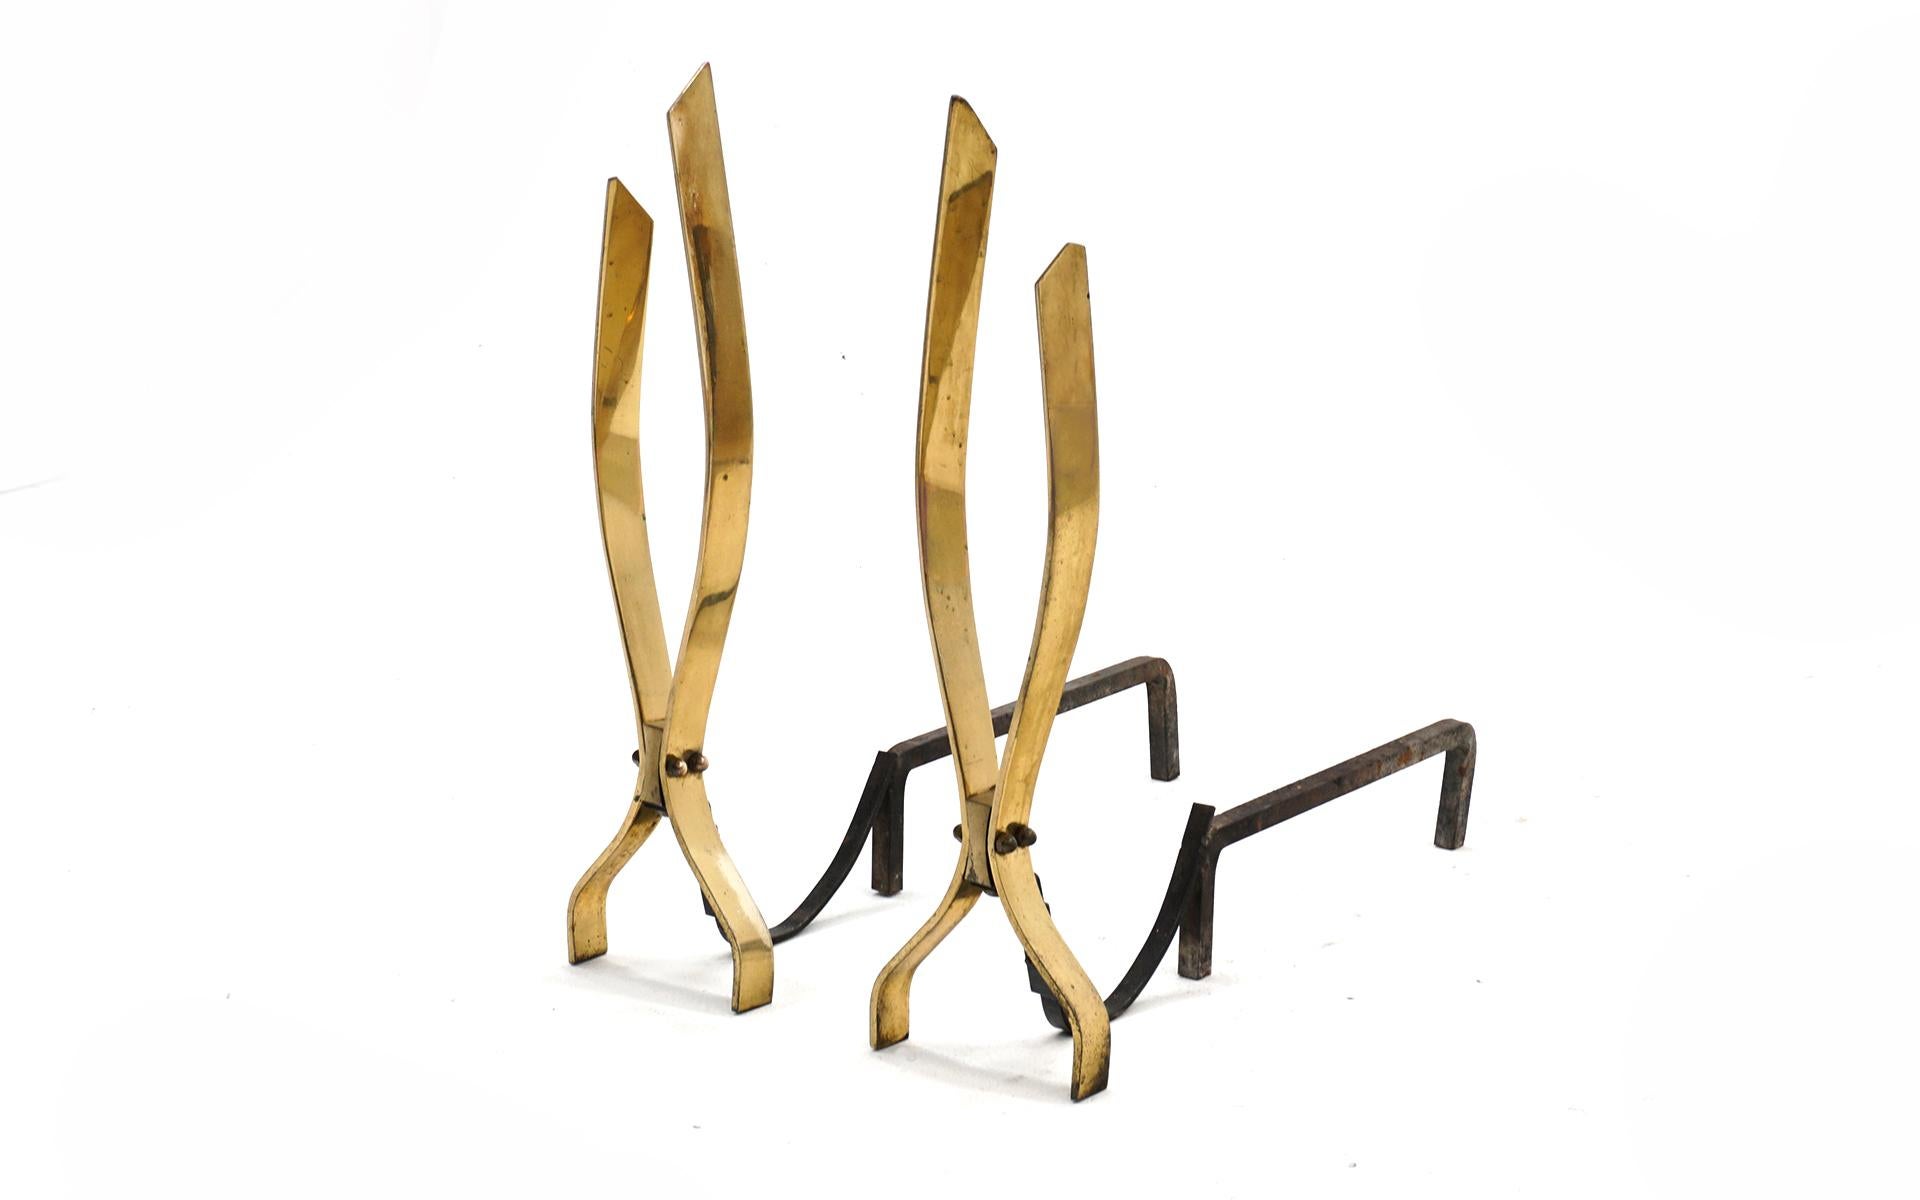 Pair of vintage andirons in brass plated steel and iron in the style of Donald Deskey. Very good condition and ready to use. We can pack and ship these in the Continental US arriving to you within two weeks.